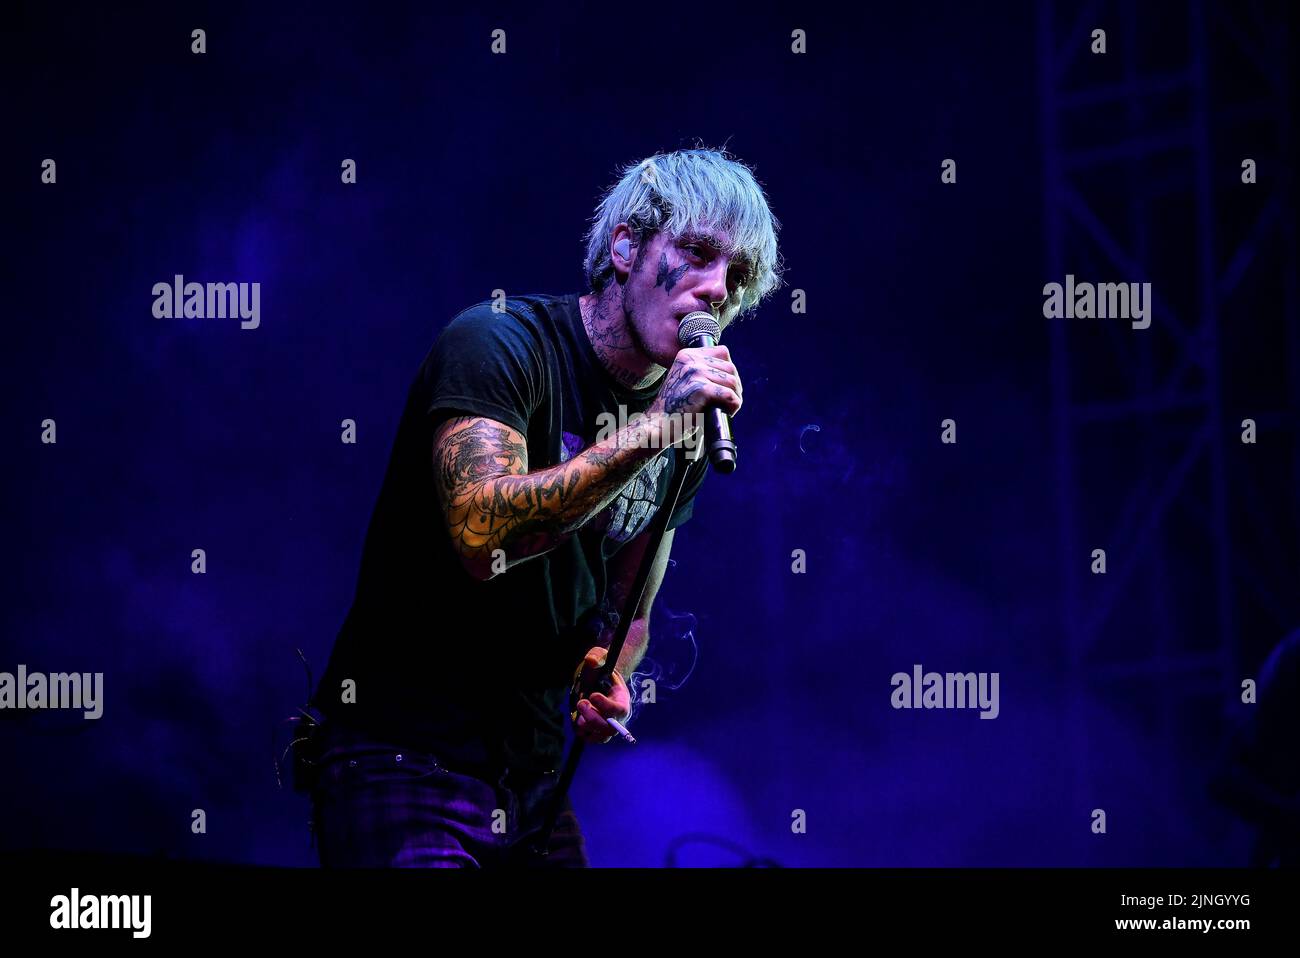 Alghero, Italy. 10th Aug, 2022. Chiello during Madame e Chiello in Tour - Estate 2022, Italian singer Music Concert in Alghero, Italy, August 10 2022 Credit: Independent Photo Agency/Alamy Live News Stock Photo